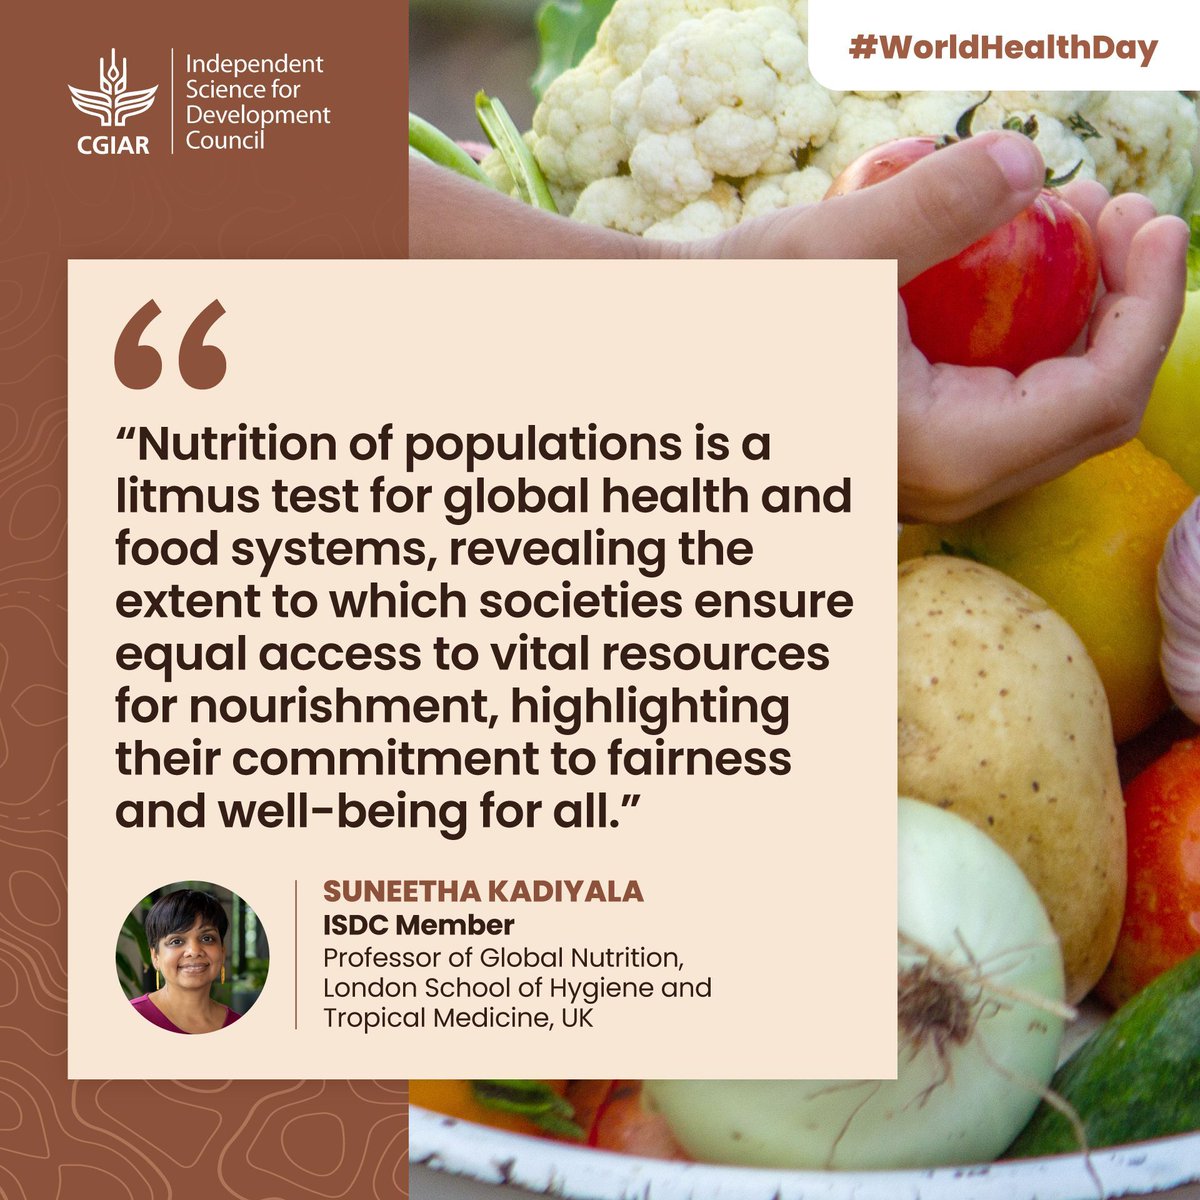 🥗 “#Nutrition of populations is a litmus test for #globalhealth and #foodsystems,” highlights Suneetha Kadiyala, @isdc_cgiar Member, in the lead-up to #WorldHealthDay this Sunday. ℹ️ bit.ly/3v1kMrm #HealthForAll #MyHealthMyRight #nutritionsecurity